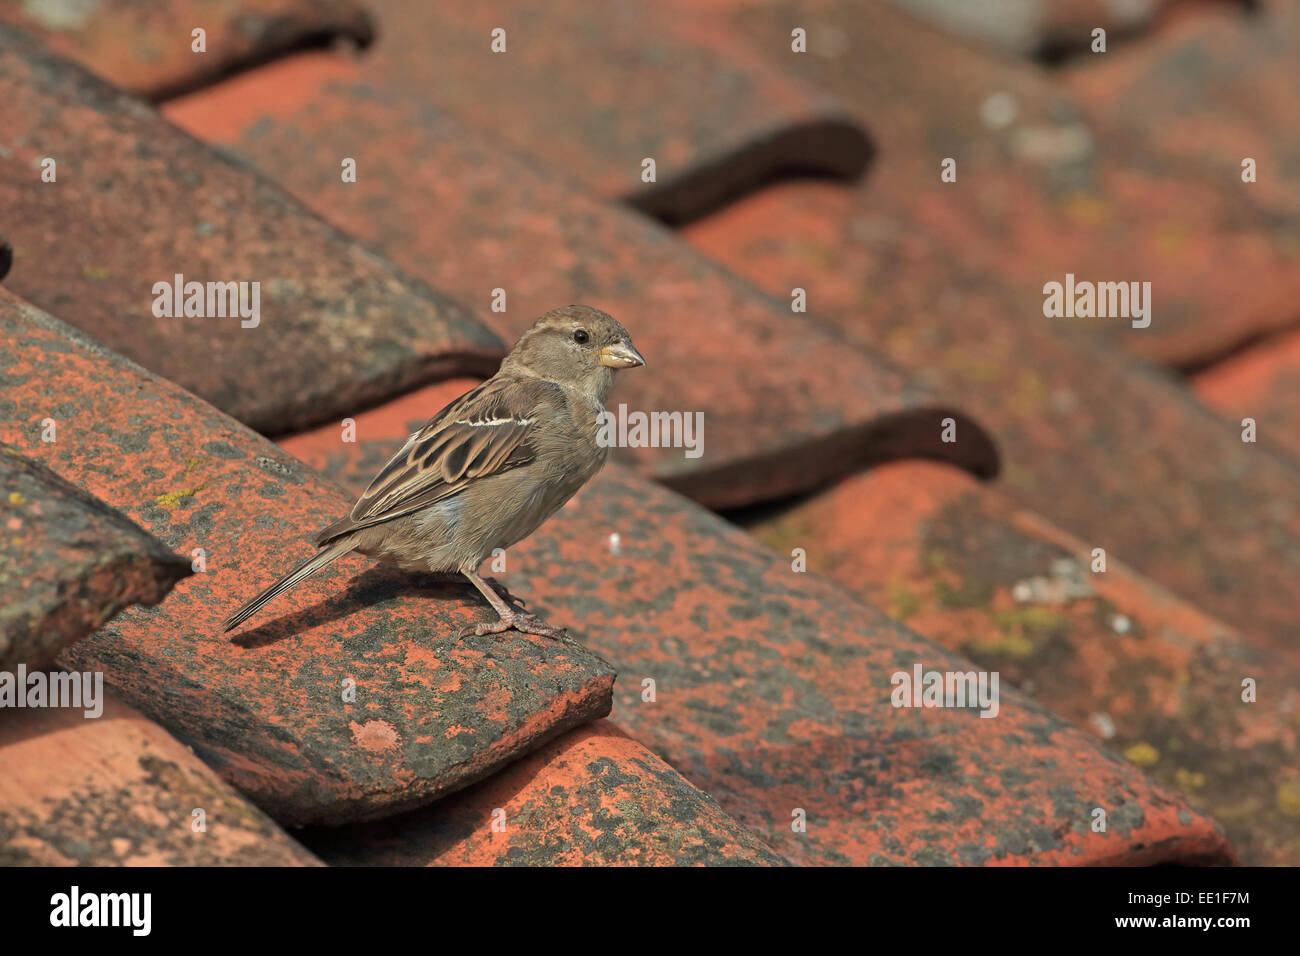 House Sparrow (Passer domesticus) adult female, standing on tiled roof, Norfolk, England, August Stock Photo